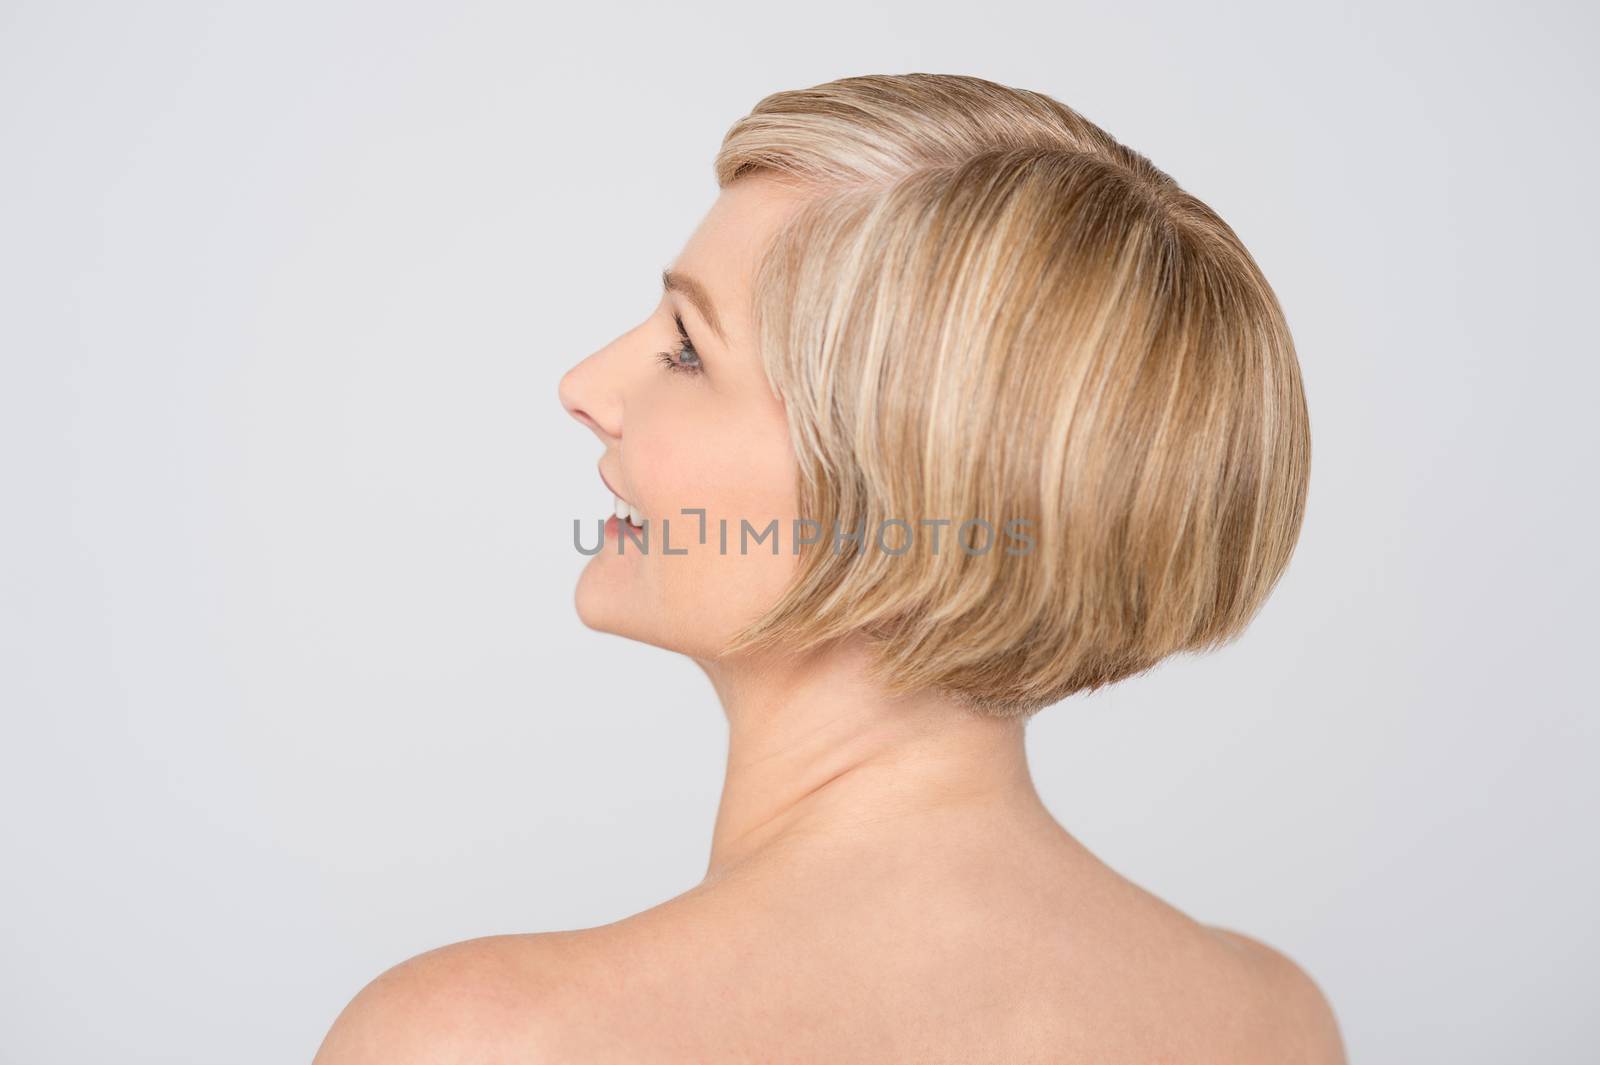 Bare shoulder woman looking at copy space